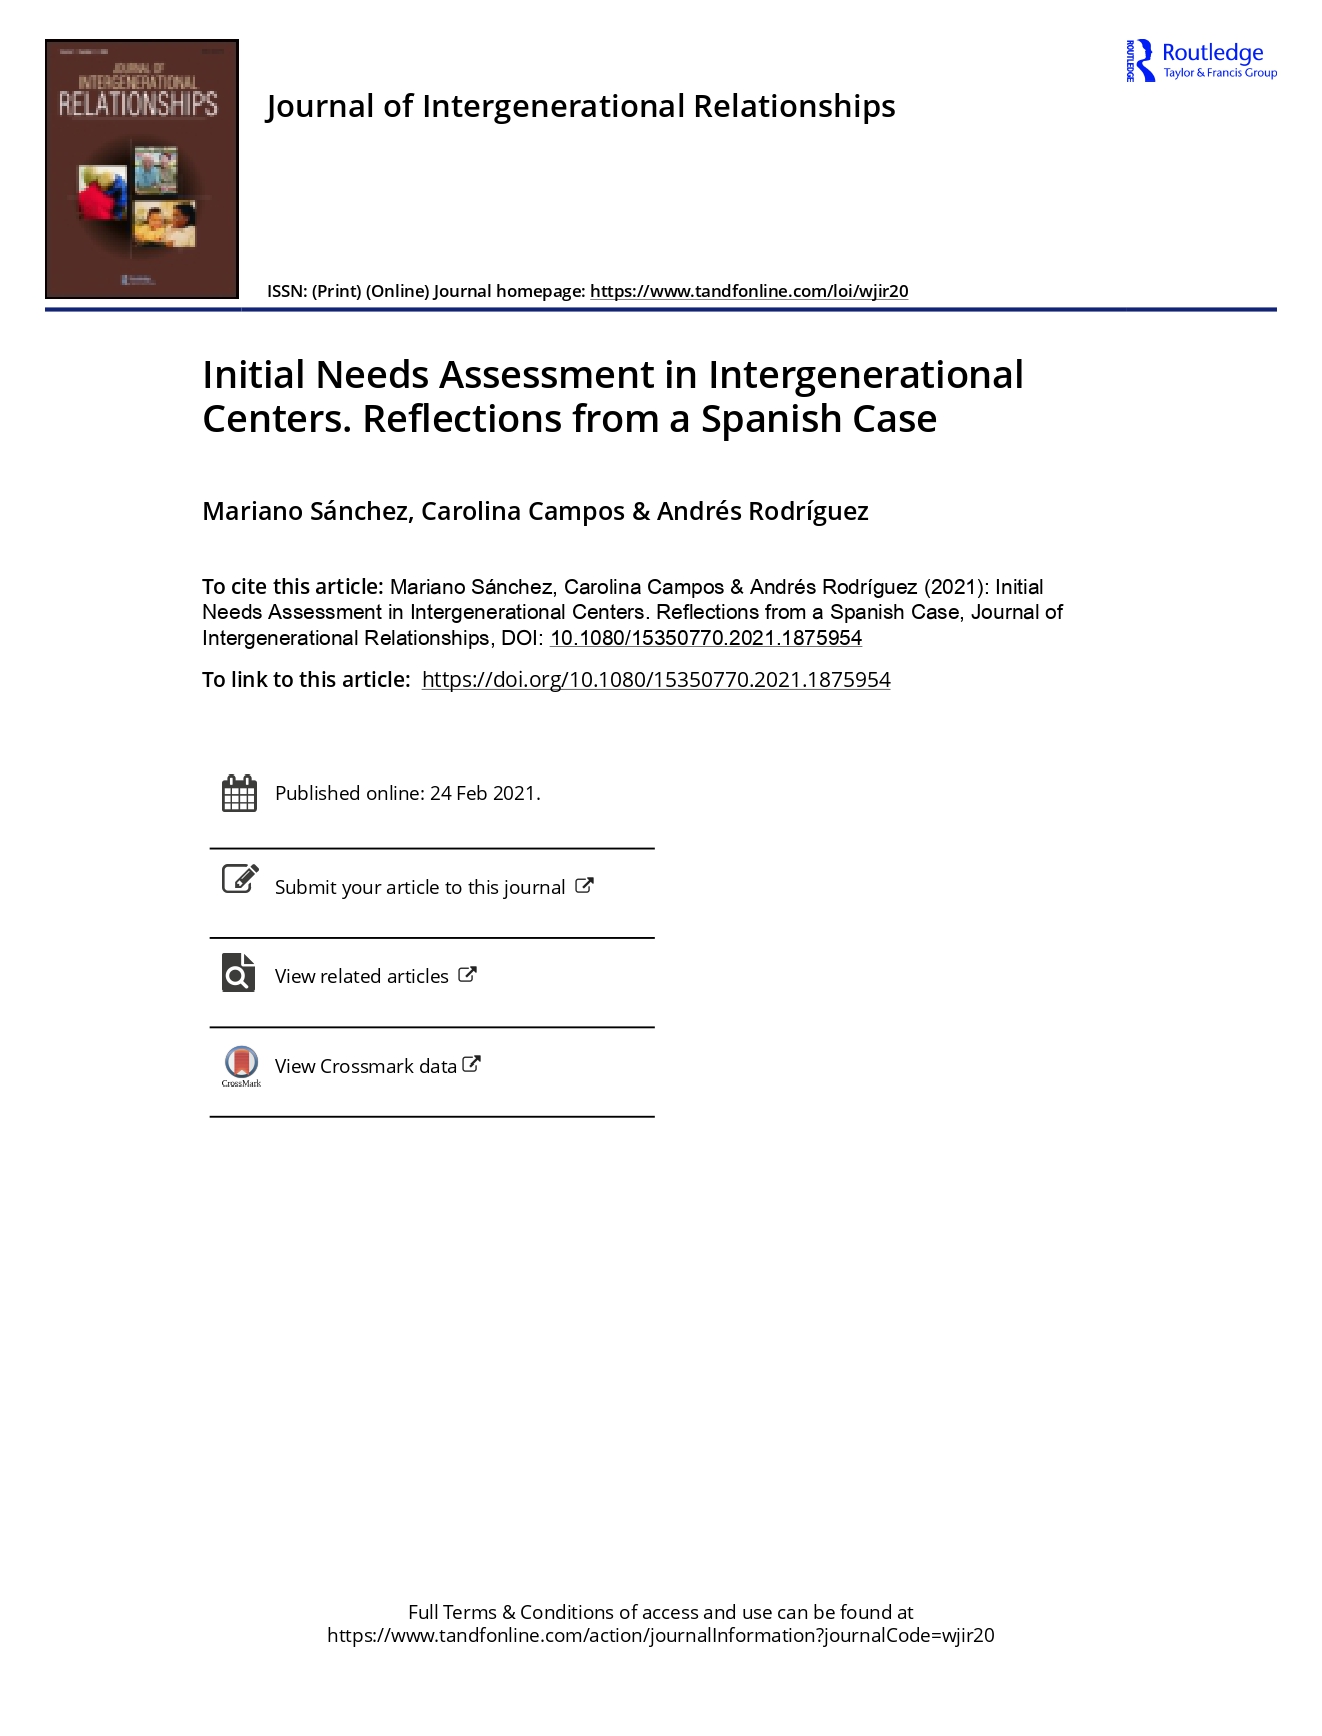 Initial Needs Assessment in Intergenerational Centers. Reflections from a Spanish Case (Journal of Intergenerational Relationships)